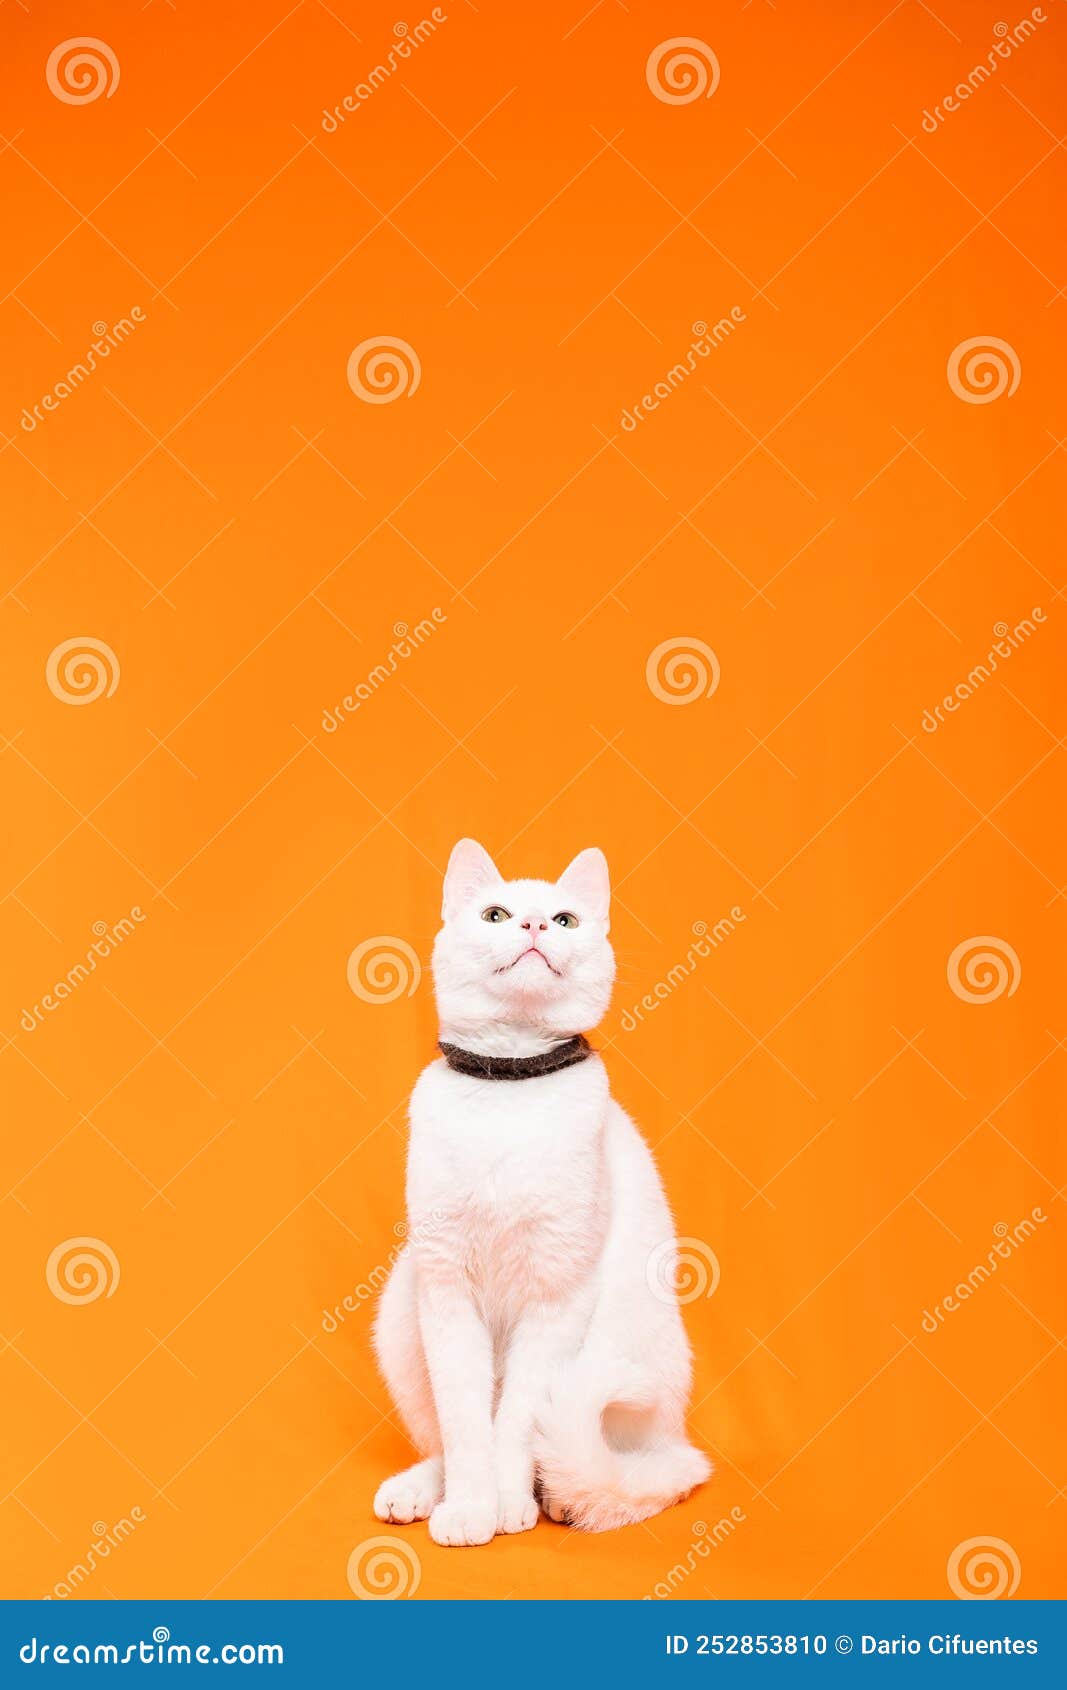 white small cat attentively looks up, orange background